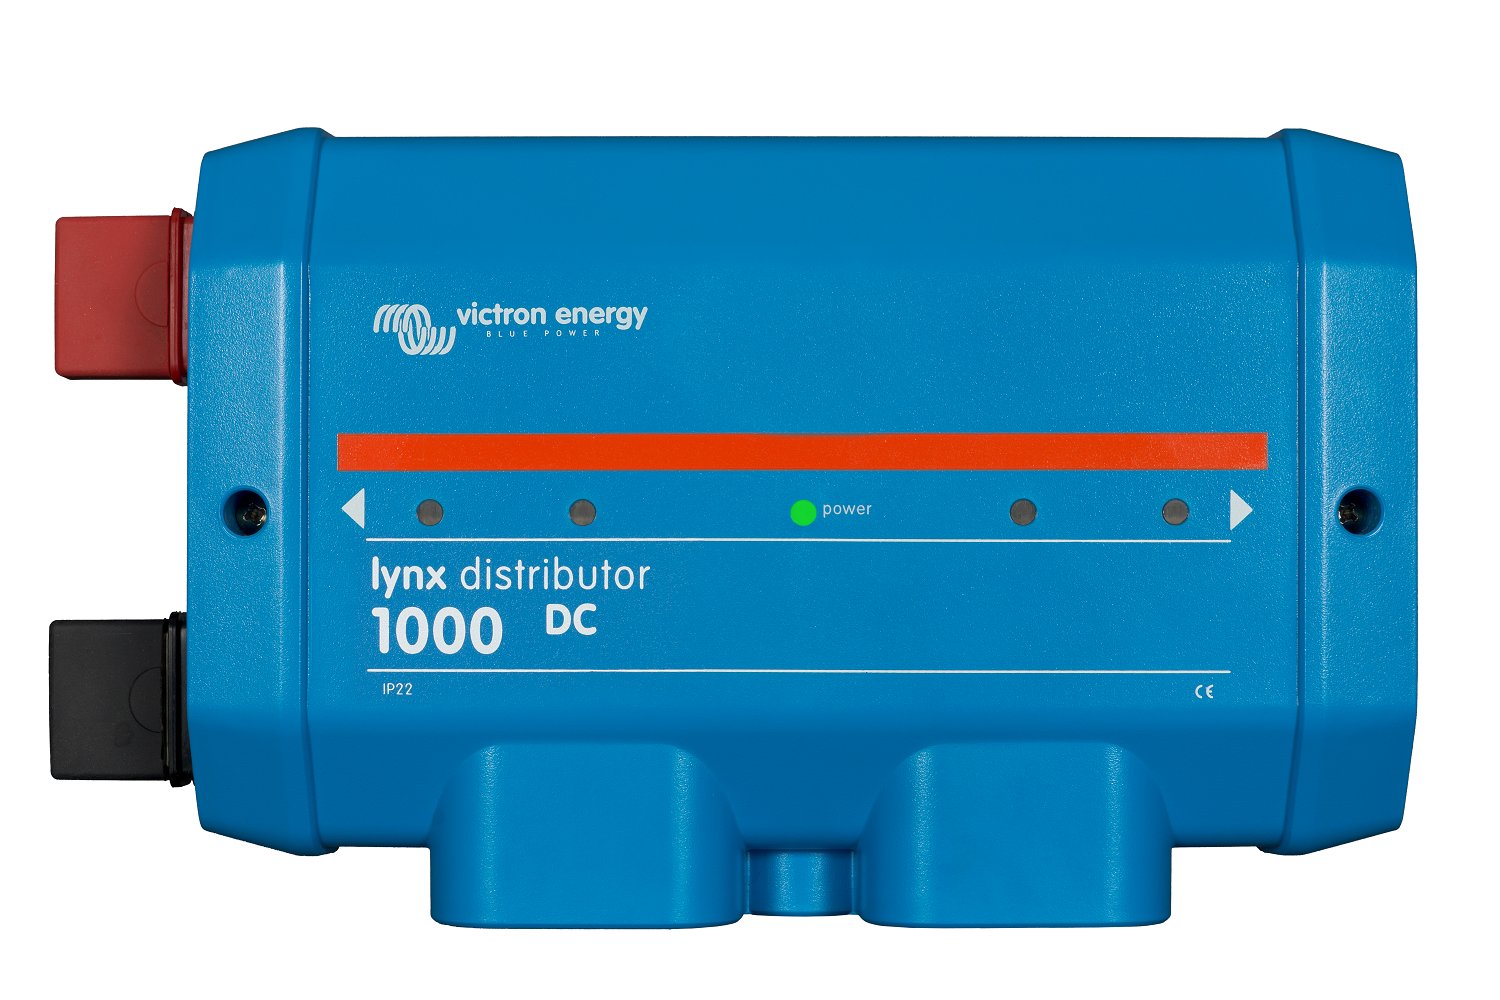 What is included with the Victron Energy Lynx Distributor's DC bus bar?